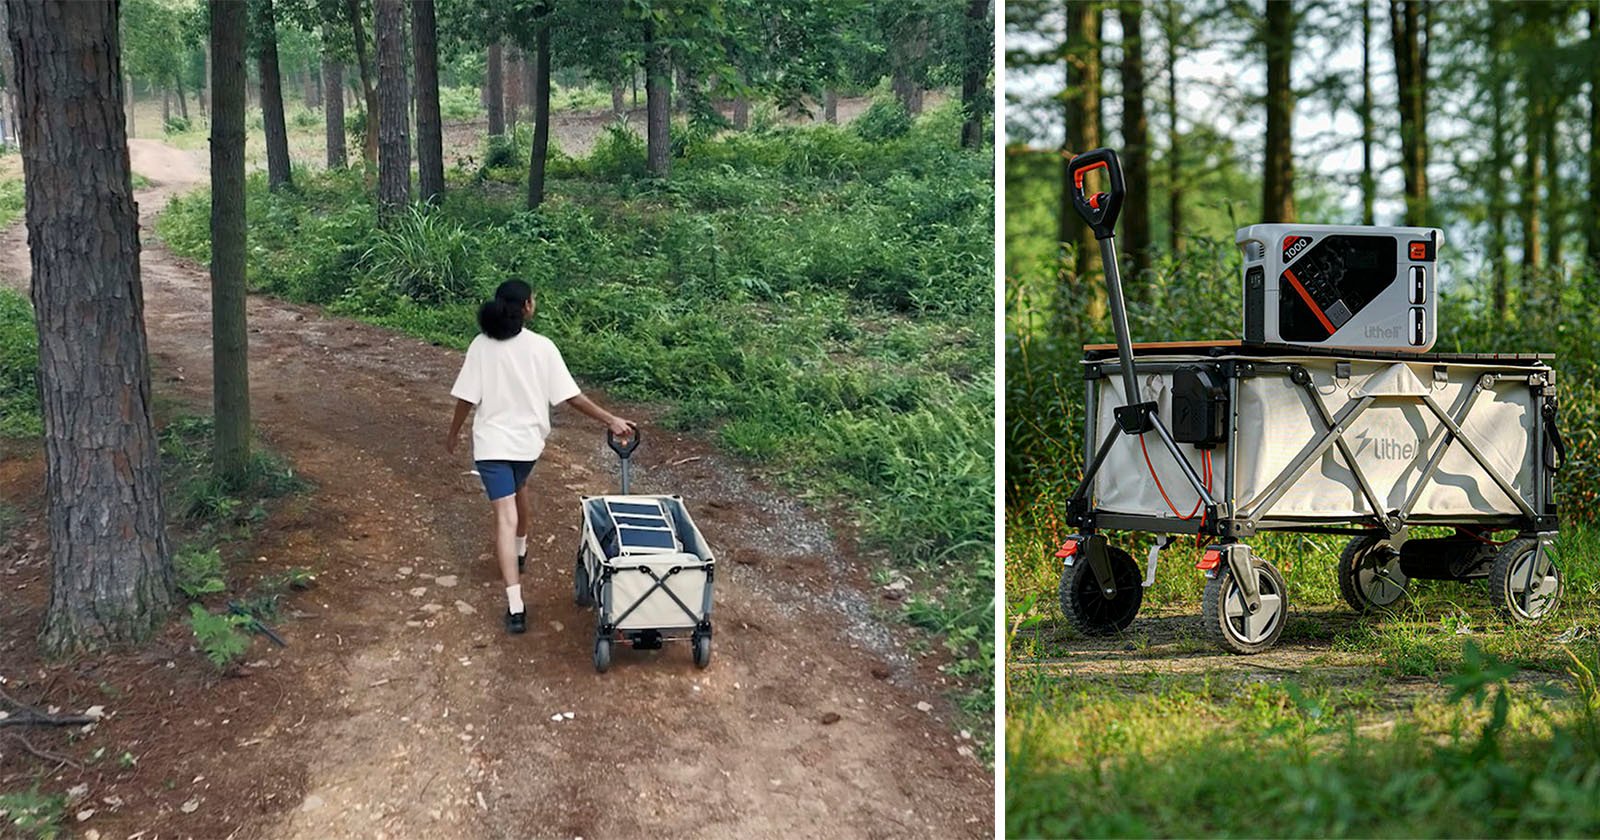 A woman pulls the electric utility wagon in an image to the left. On the right, the wagon is seen with its power bank on top, in the woods.